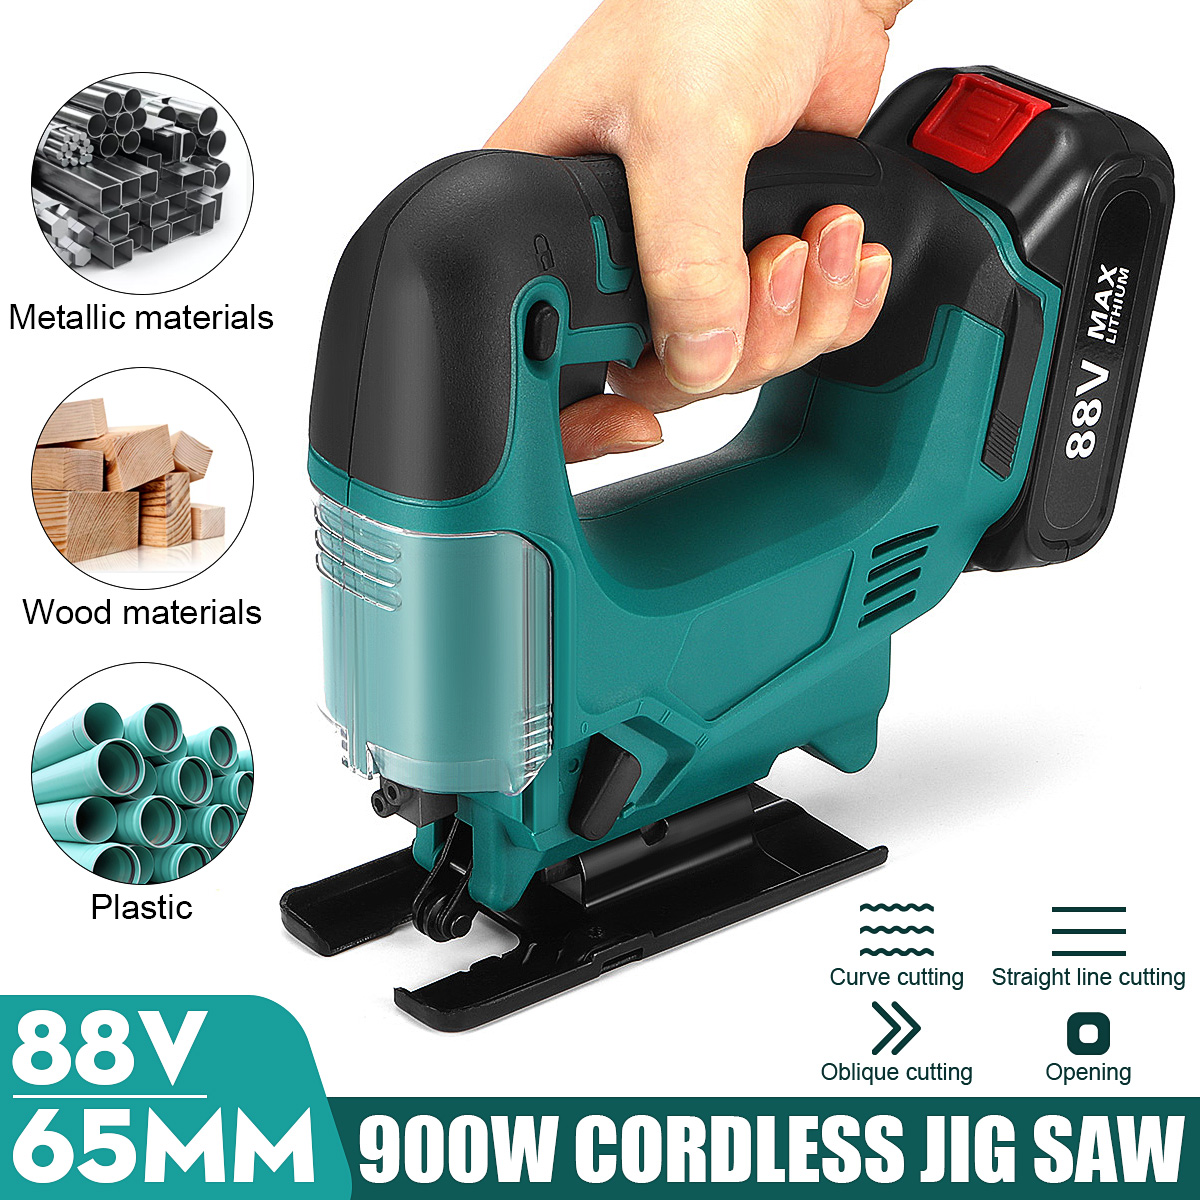 88VF-Wireless-Electric-Jig-Saw-Rechargeable-Portable-Woodworking-Wood-Plastic-Aluminium-Cutting-Tool-1880981-1